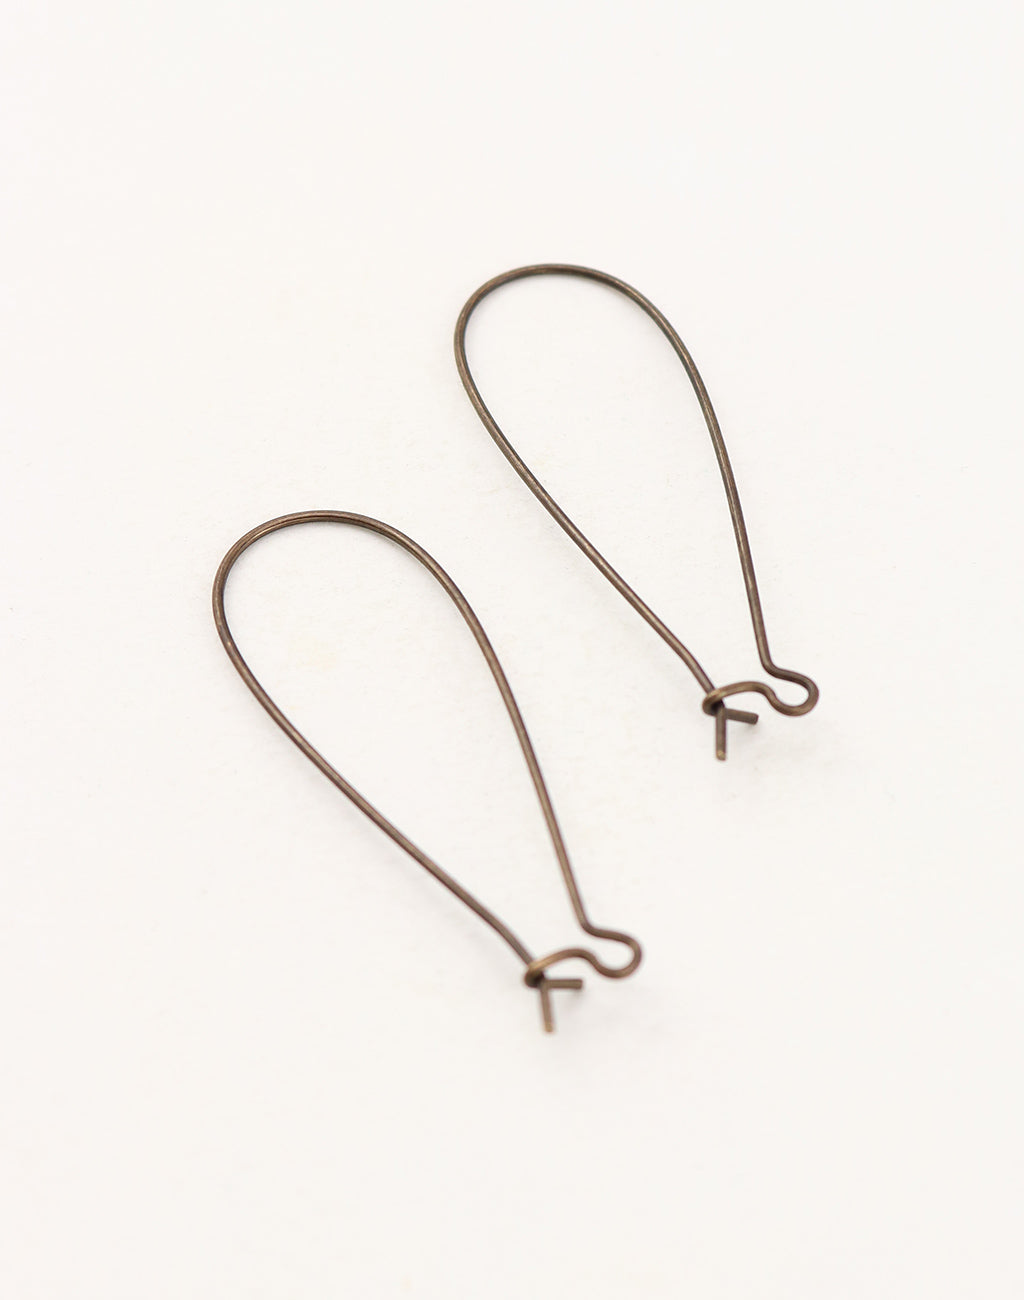 Long Arched Ear Wire, 45x17mm, (2pcs)